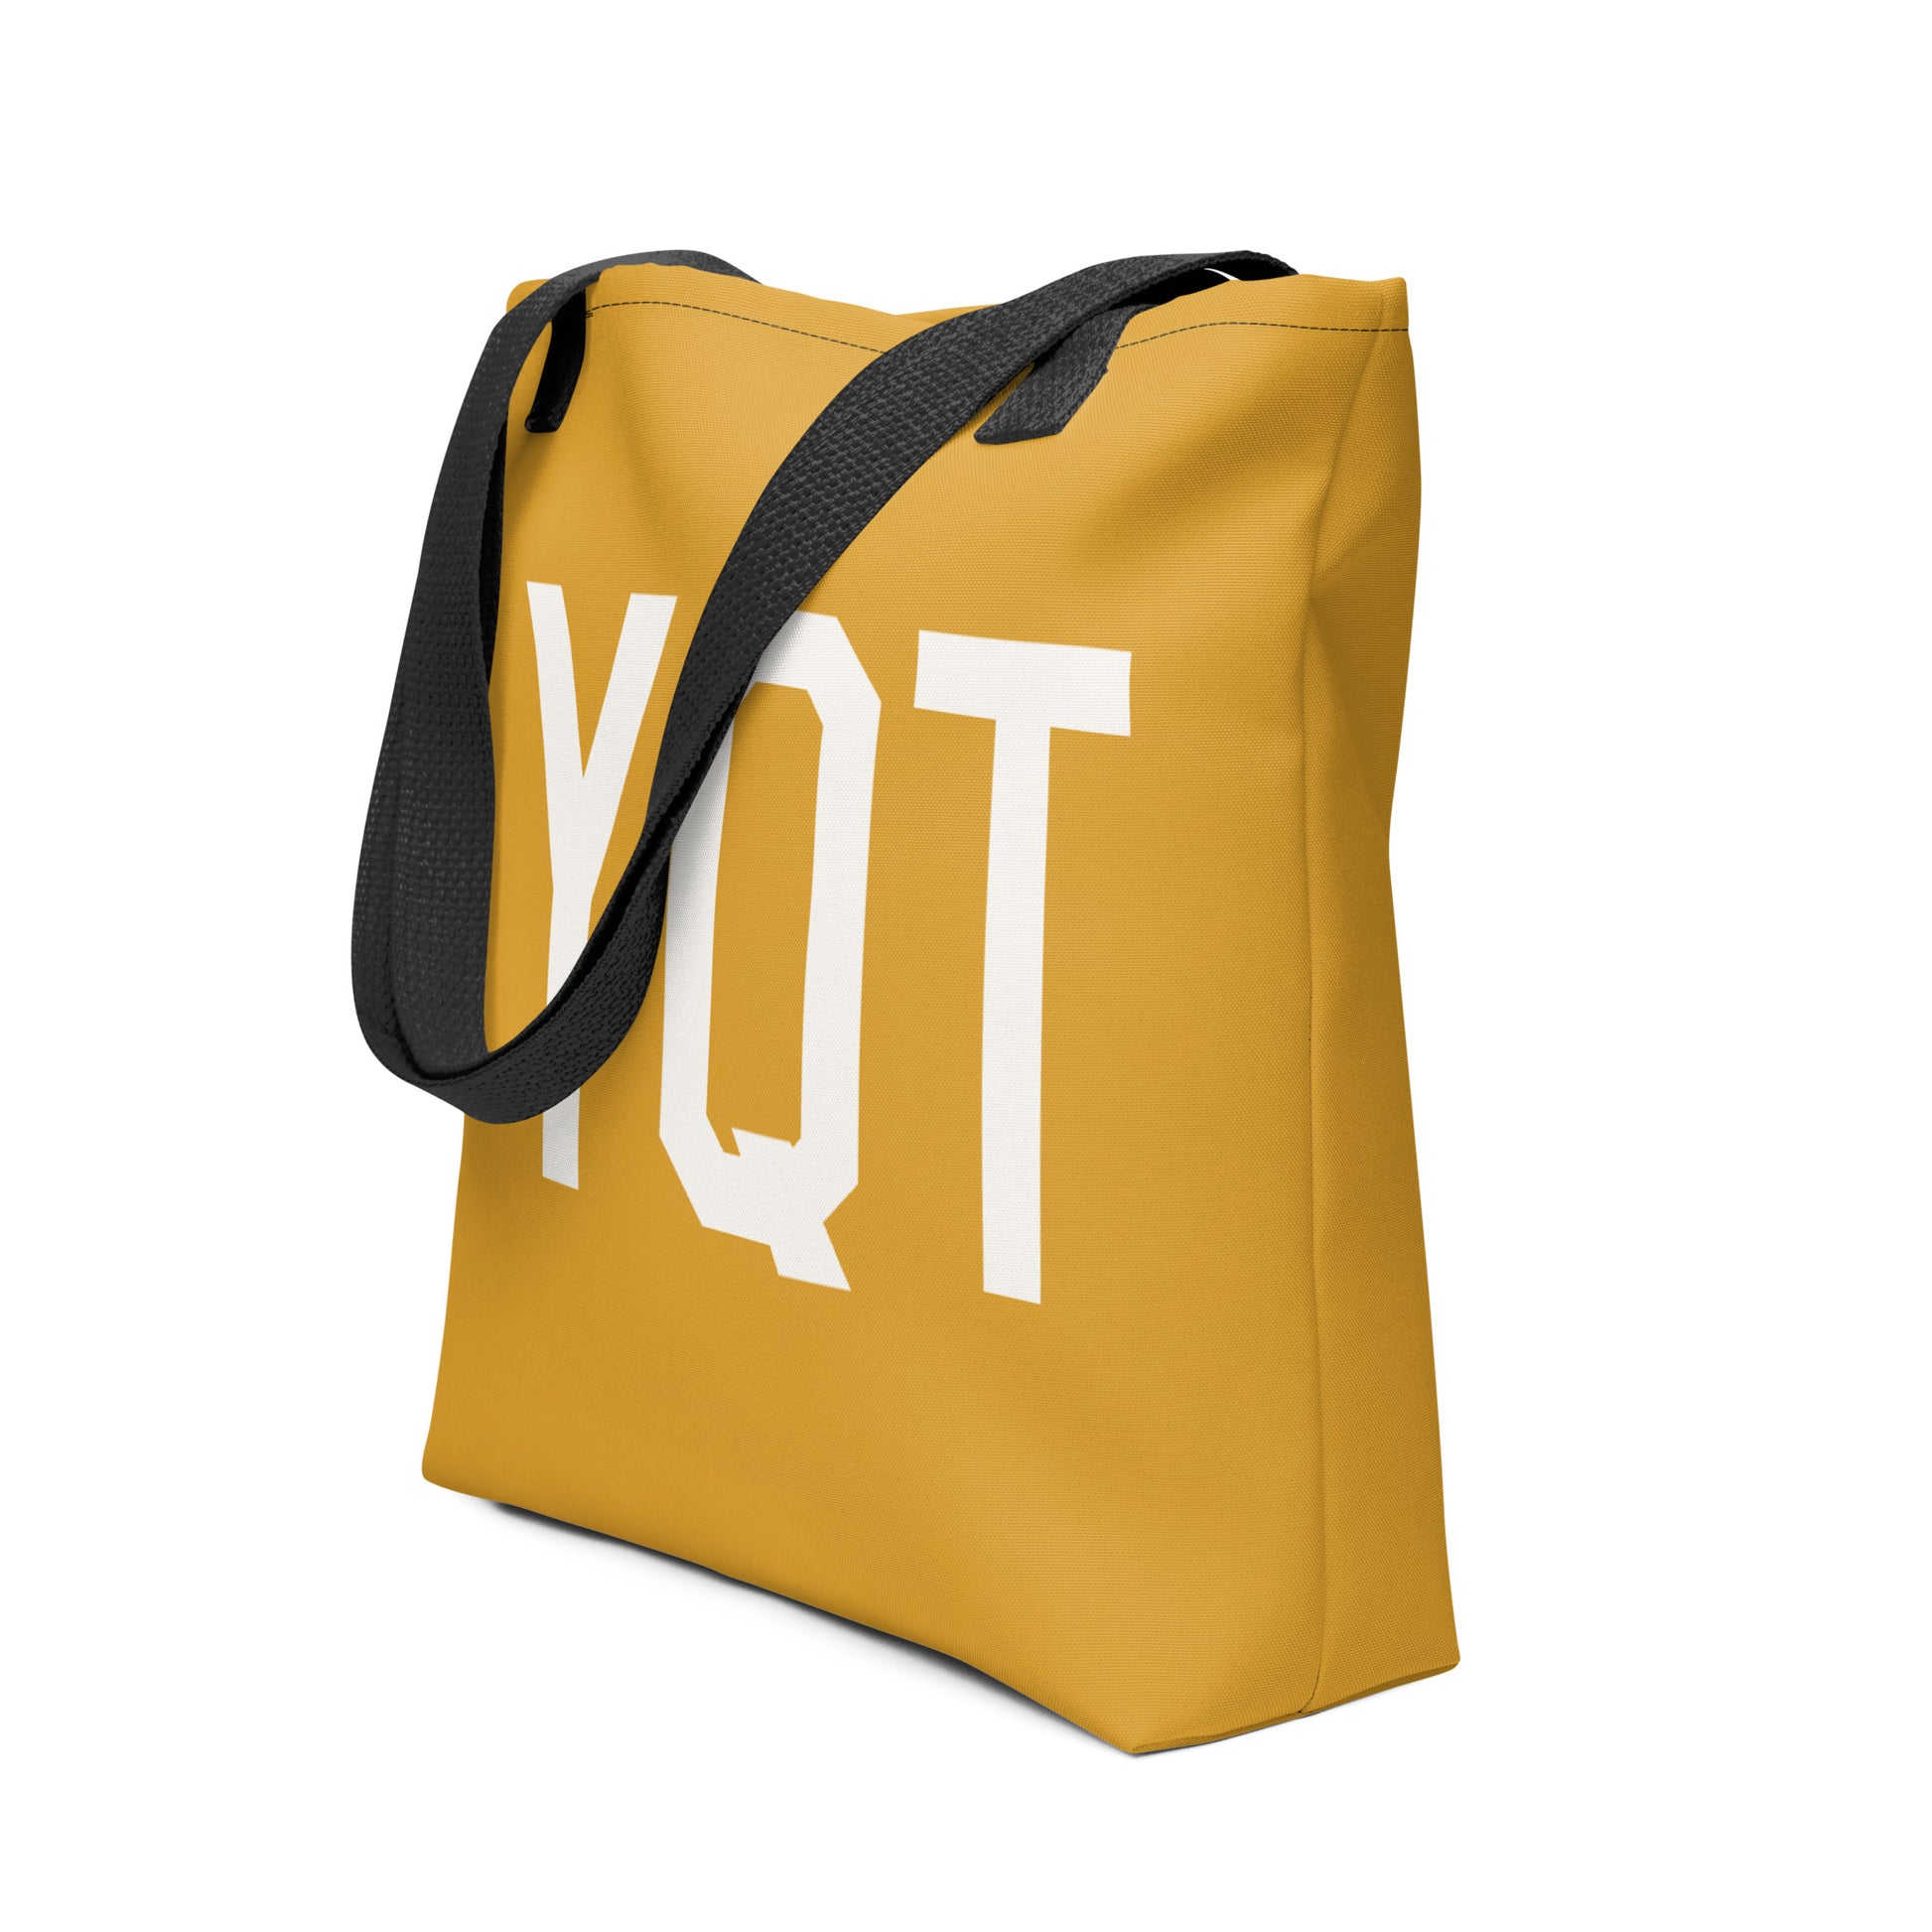 Aviation Gift Tote Bag - Buttercup • YQT Thunder Bay • YHM Designs - Image 05